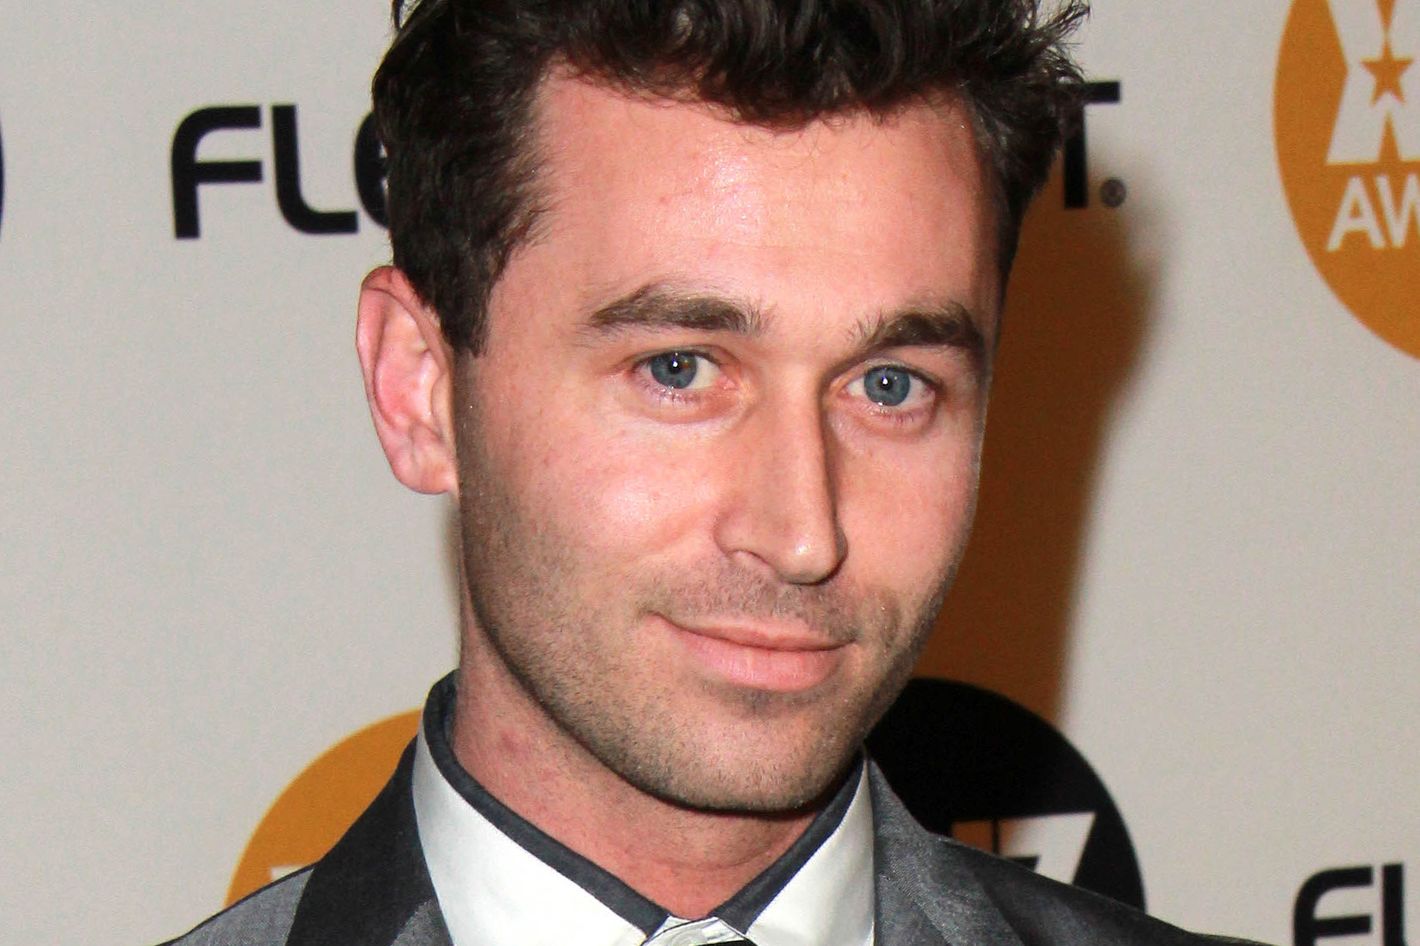 Why Women Fell for James Deen pic